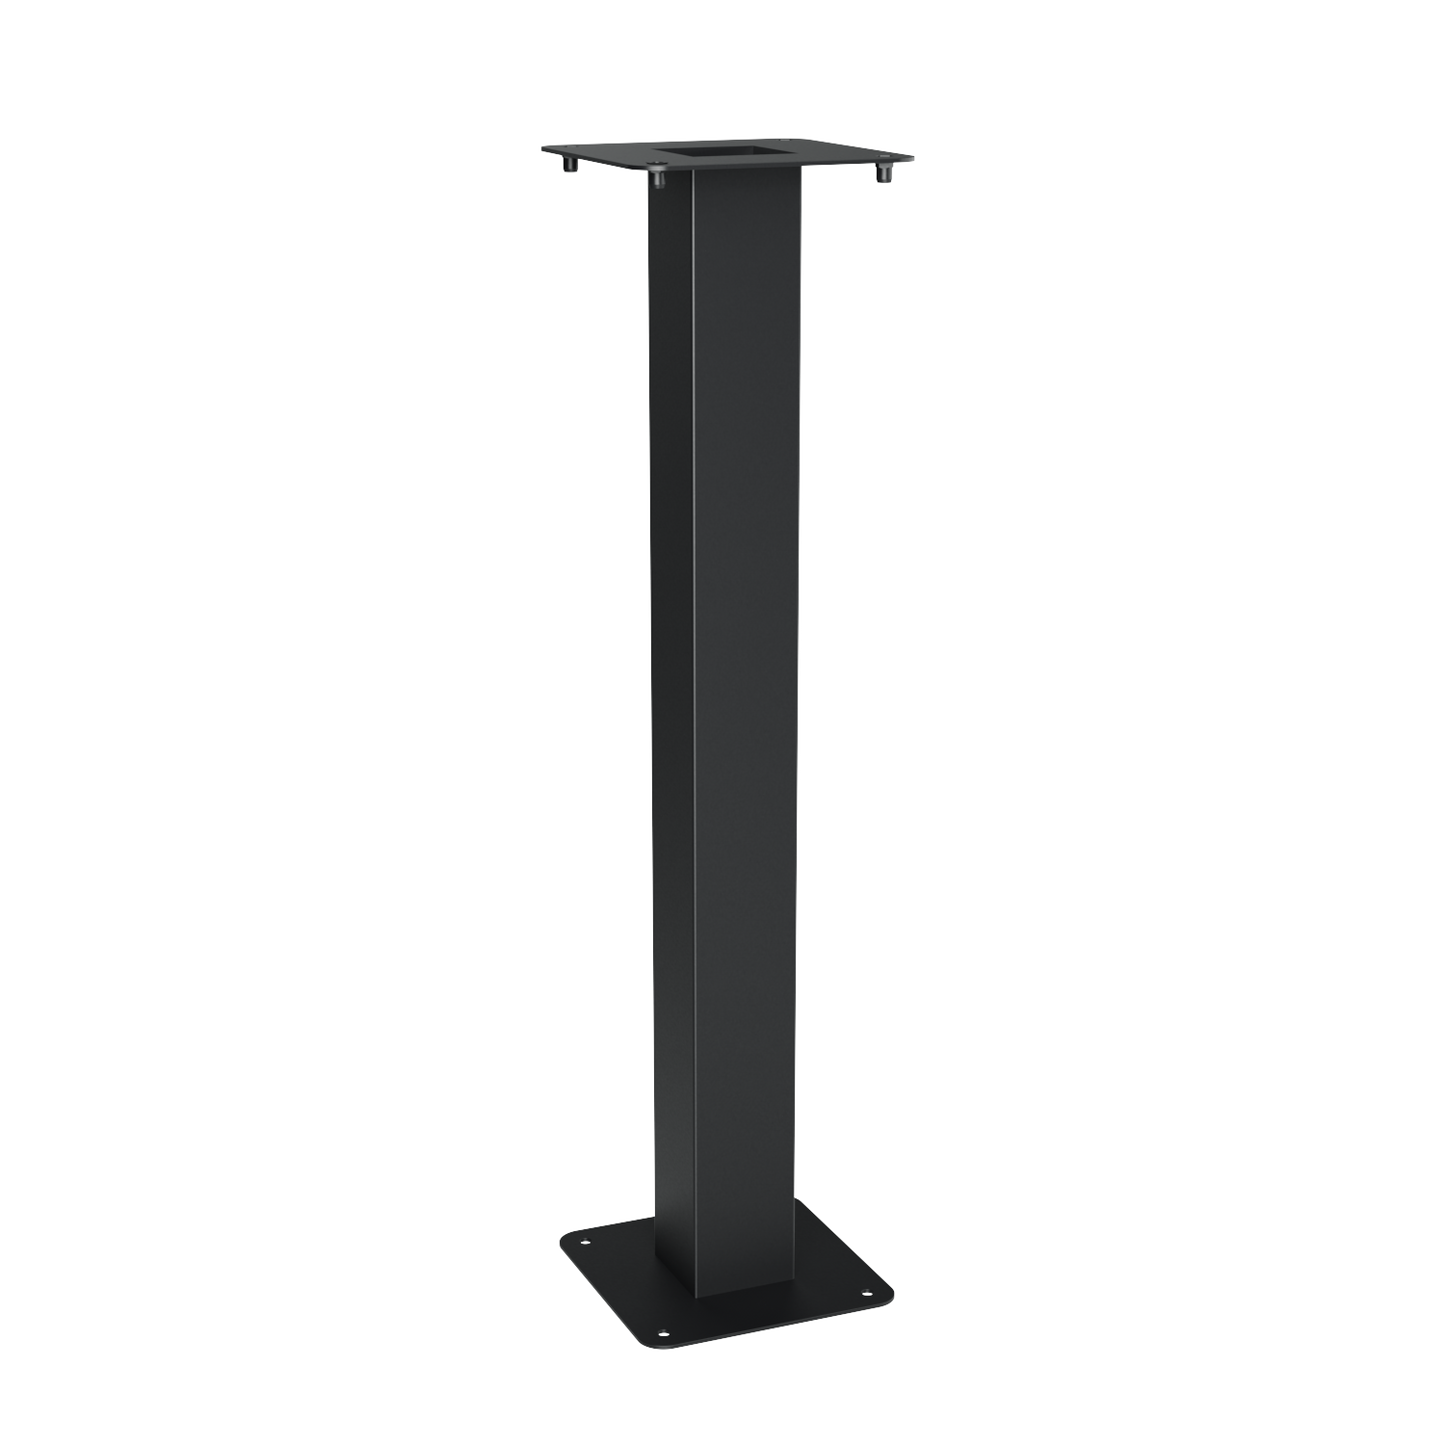 Post for TOWN SQUARE Mailbox by Bravios - in black, white, anthracite and gray